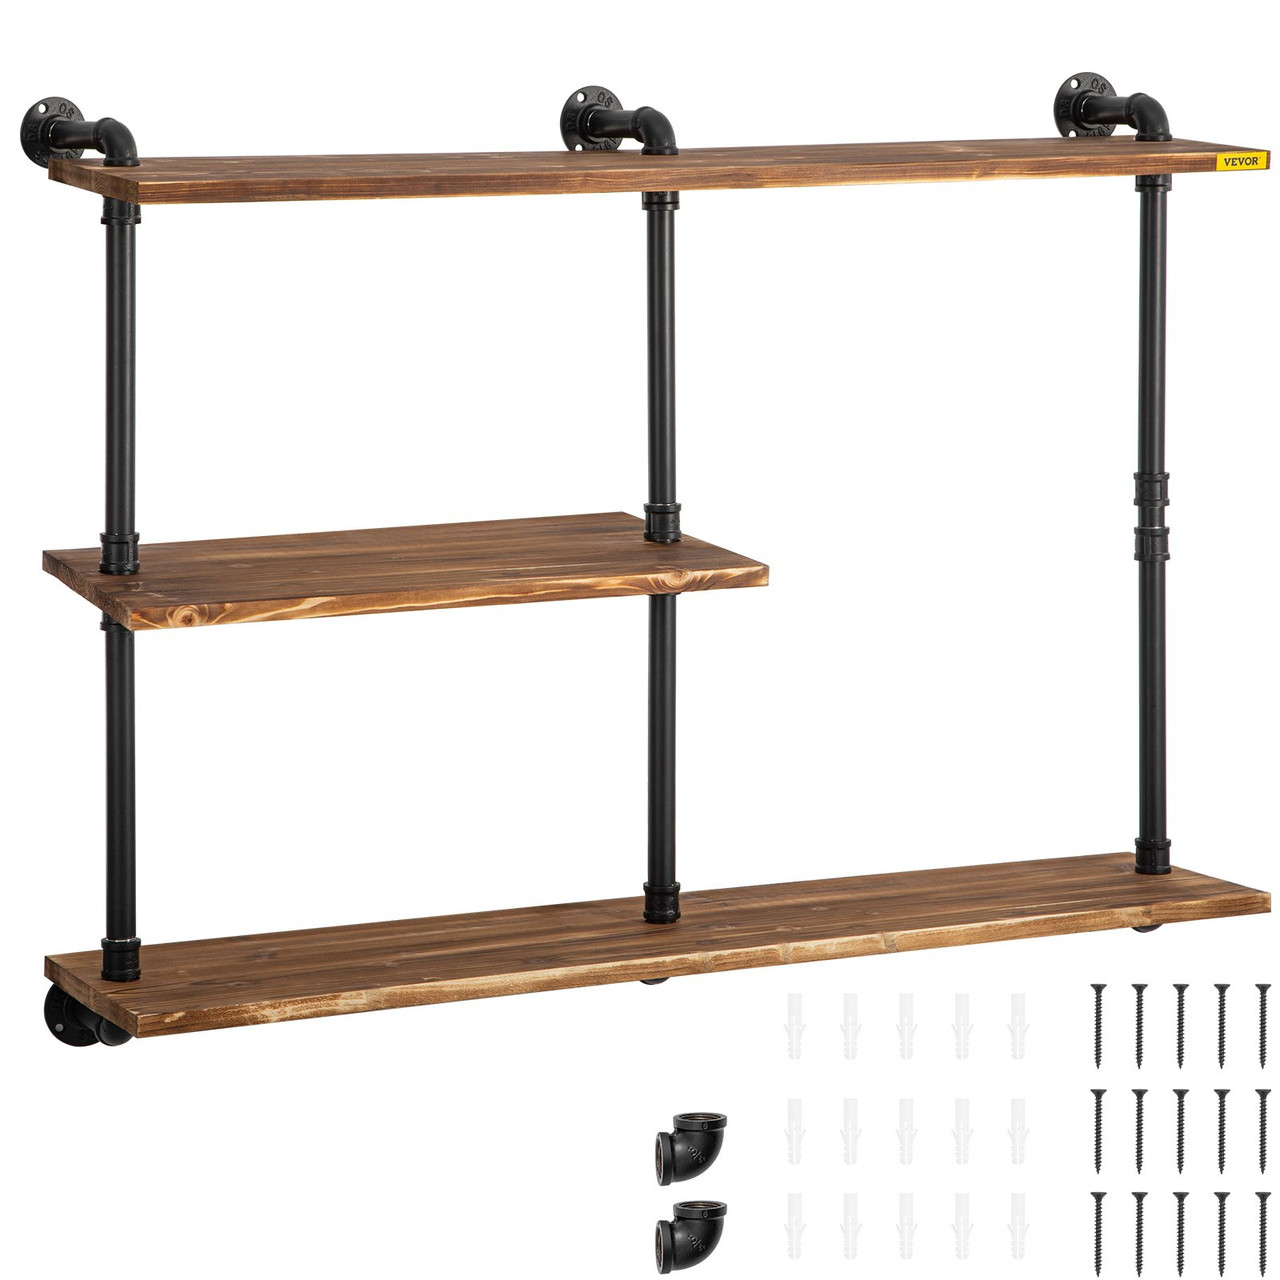 Industrial Pipe Shelving, Pipe Shelves with 3-Tier Wood Planks, Rustic Floating Shelves Wall Mounted, Wall Shelf DIY Bookshelf for Bar Kitchen Bathroom Farmhouse Living Room, 43x38x11 inch